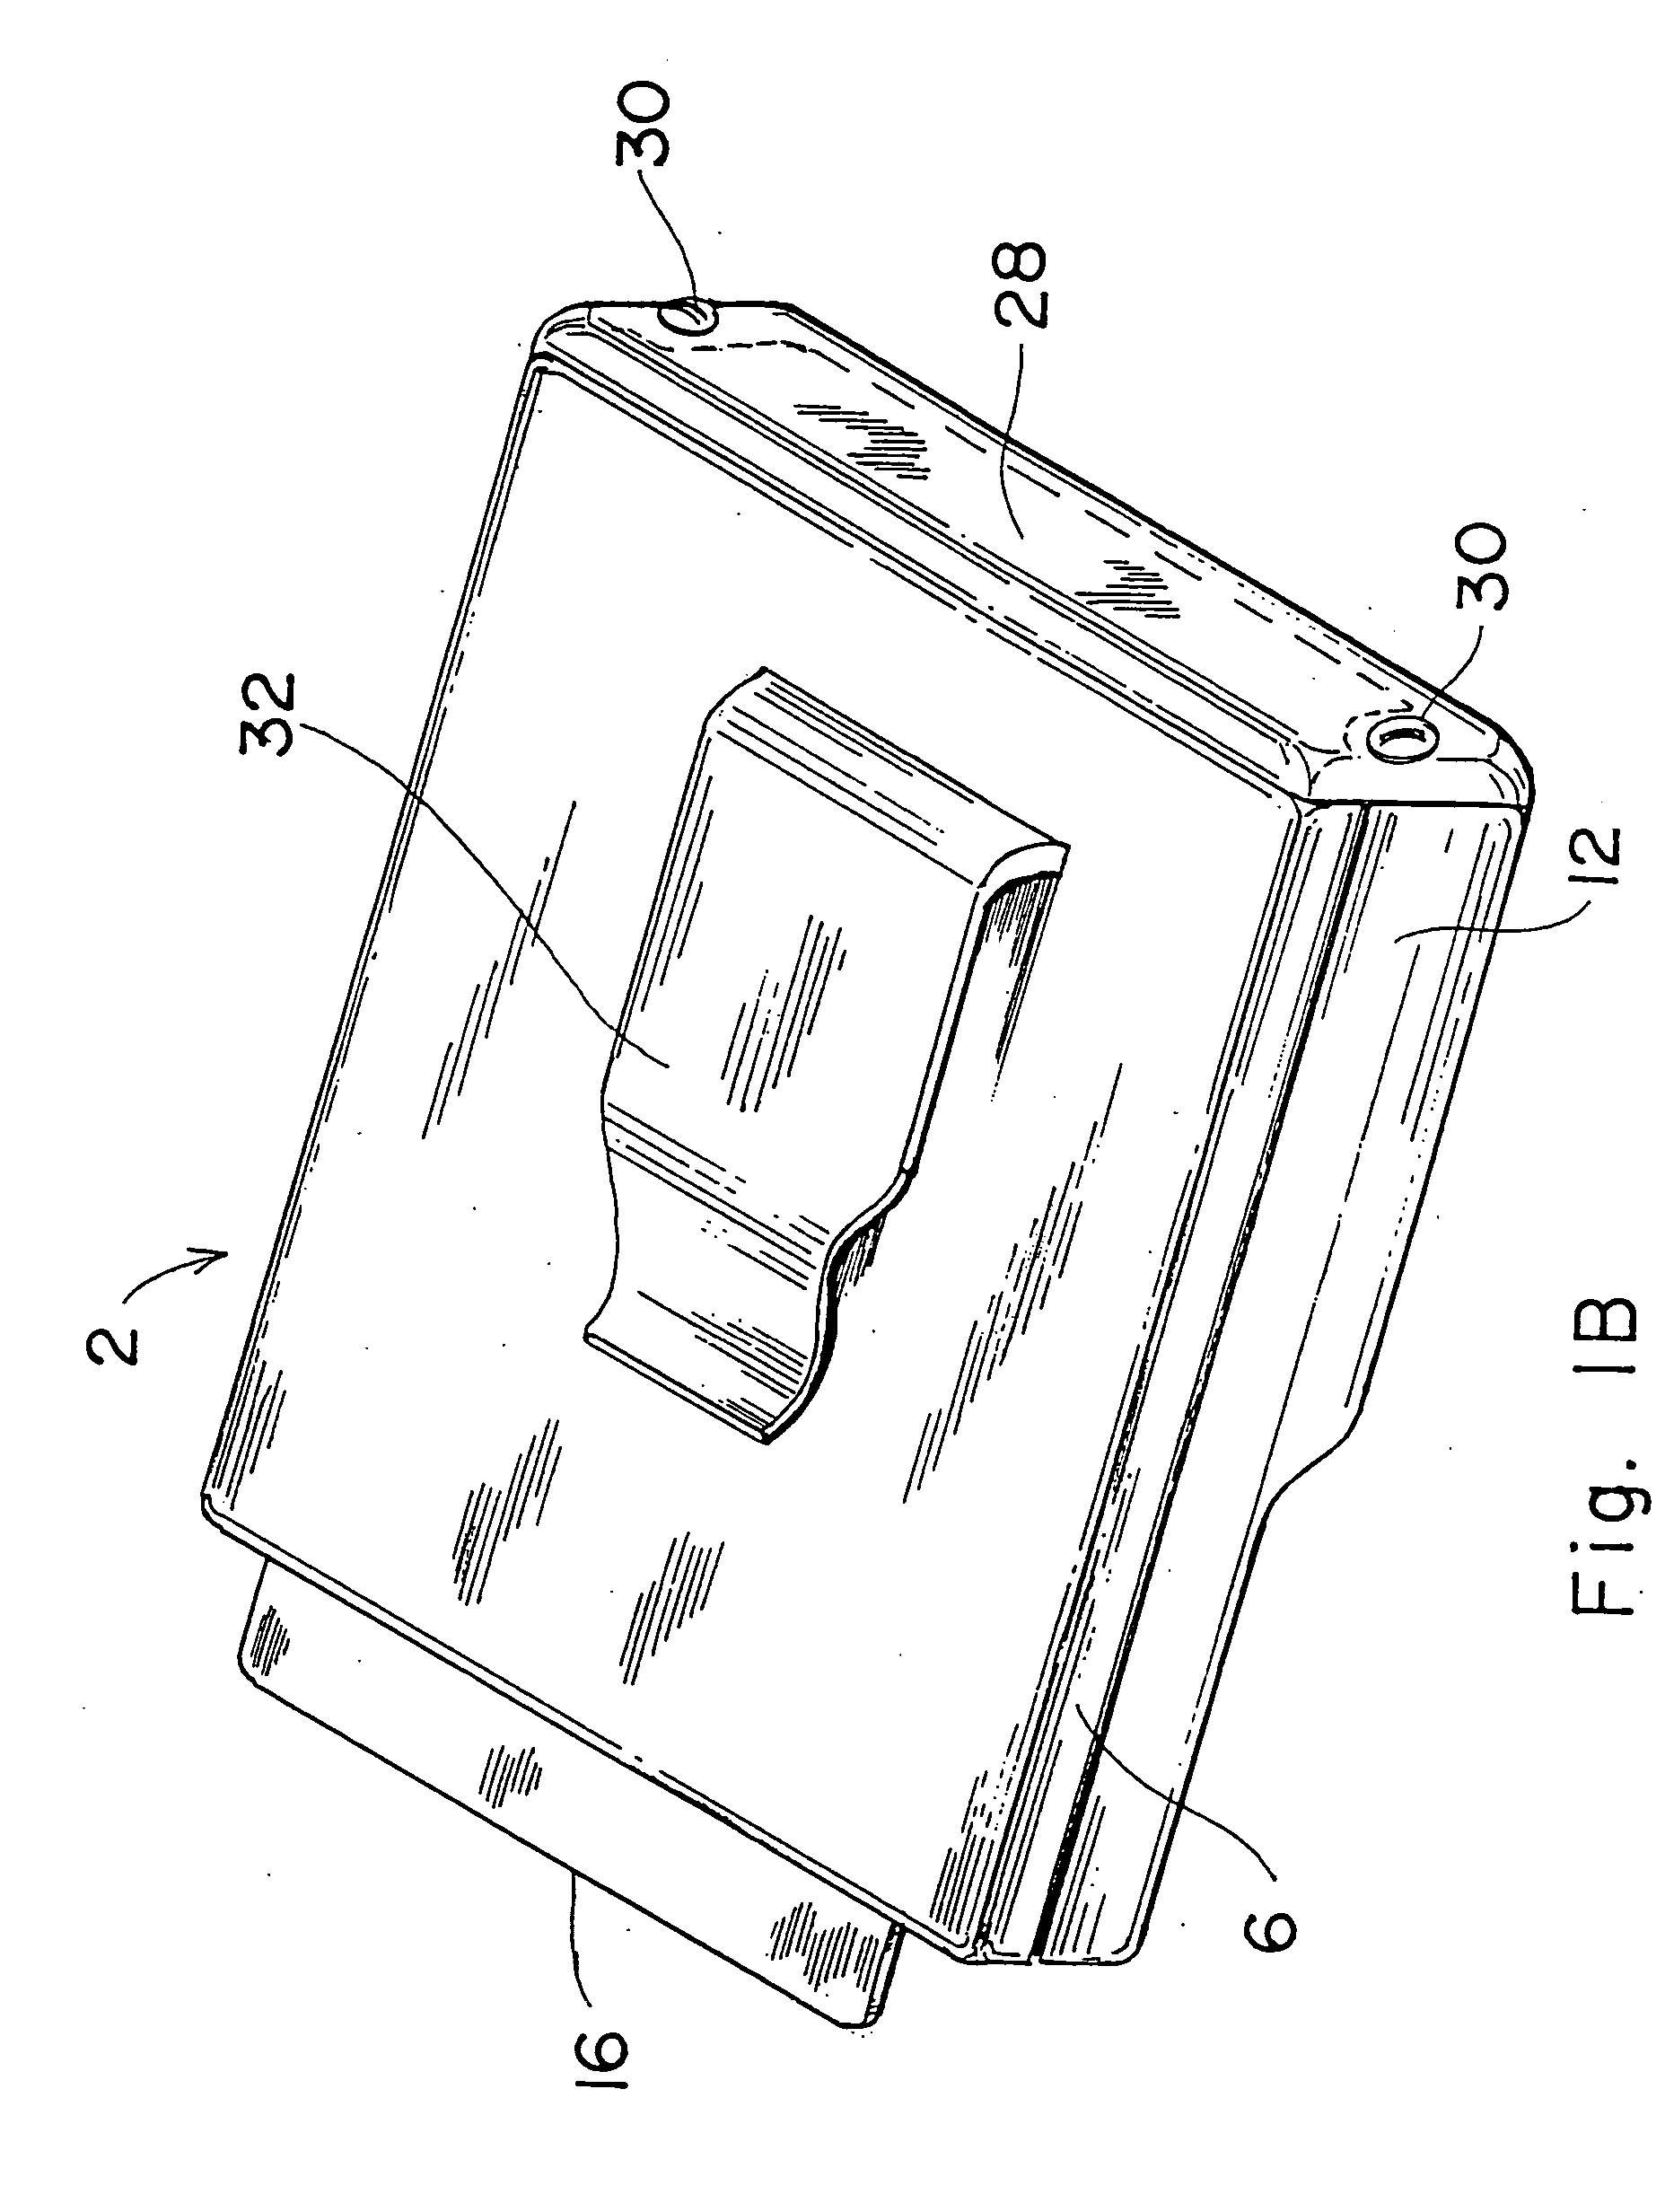 High-capacity card holder and ejector